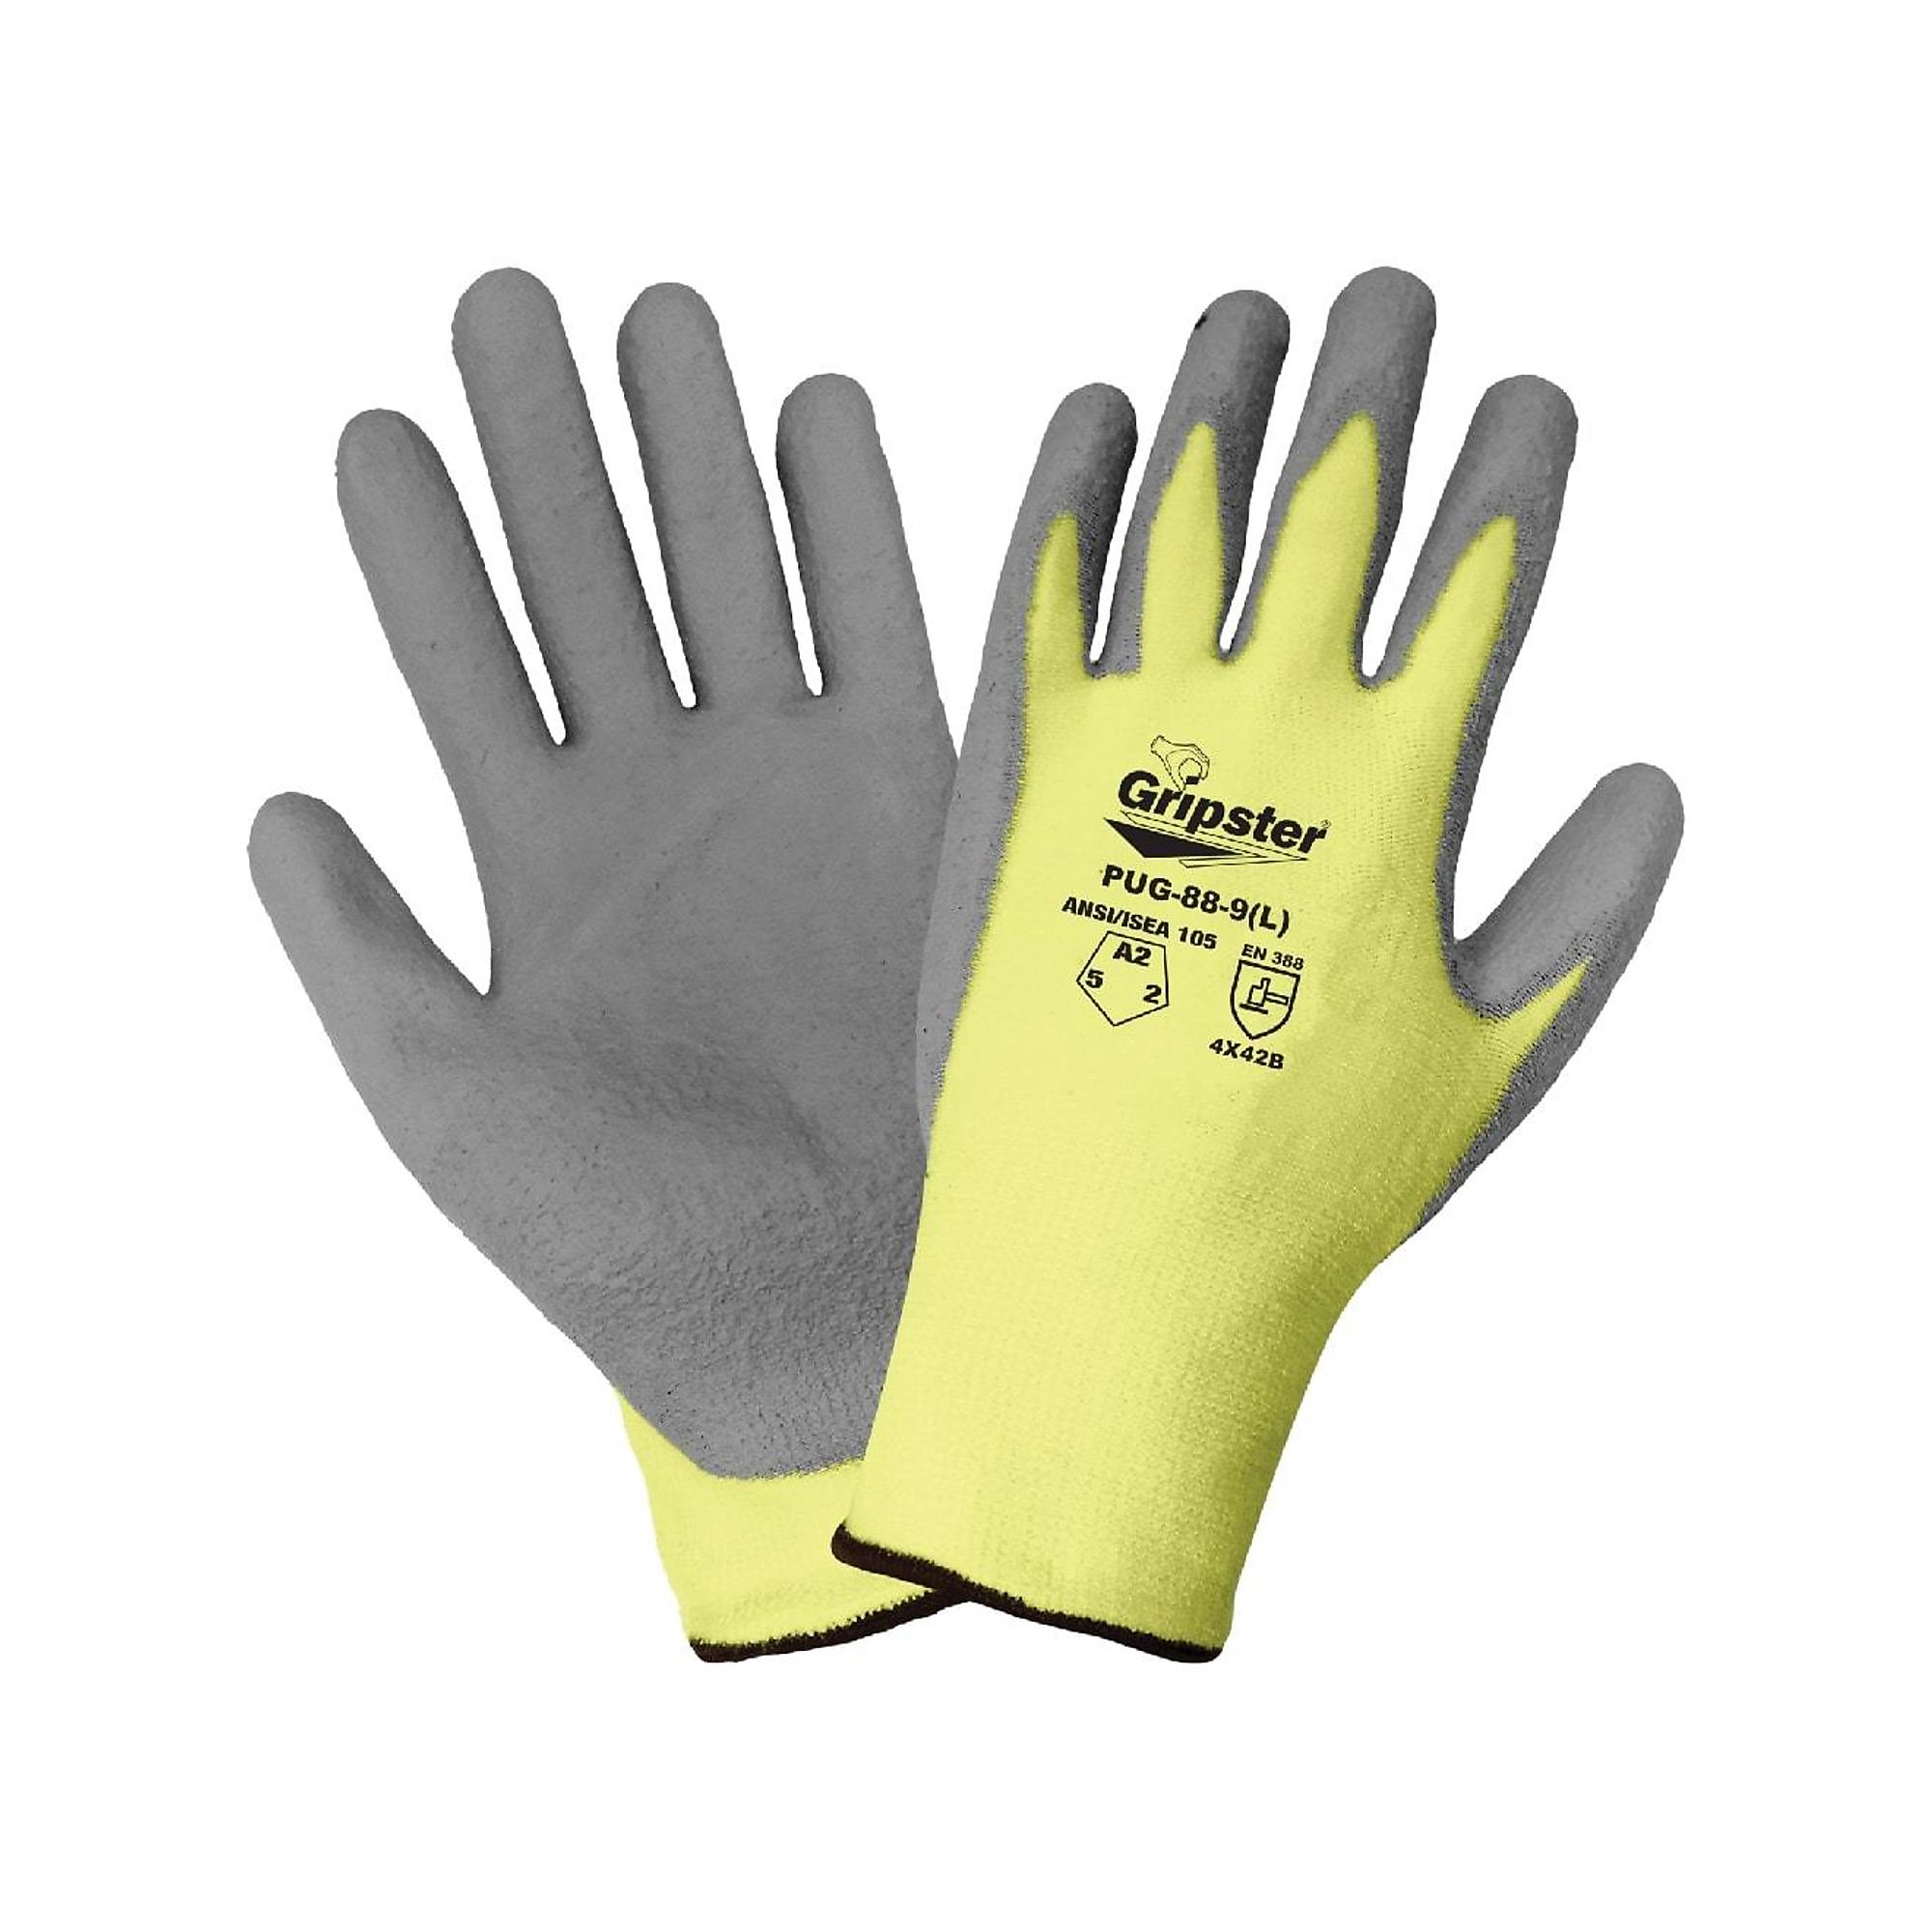 Global Glove Gripster , Yellow, Poly Coated, Cut Resistant A2 Gloves - 12 Pairs, Size XS, Color Yellow/Gray, Included (qty.) 12 Model PUG-88-6(XS)